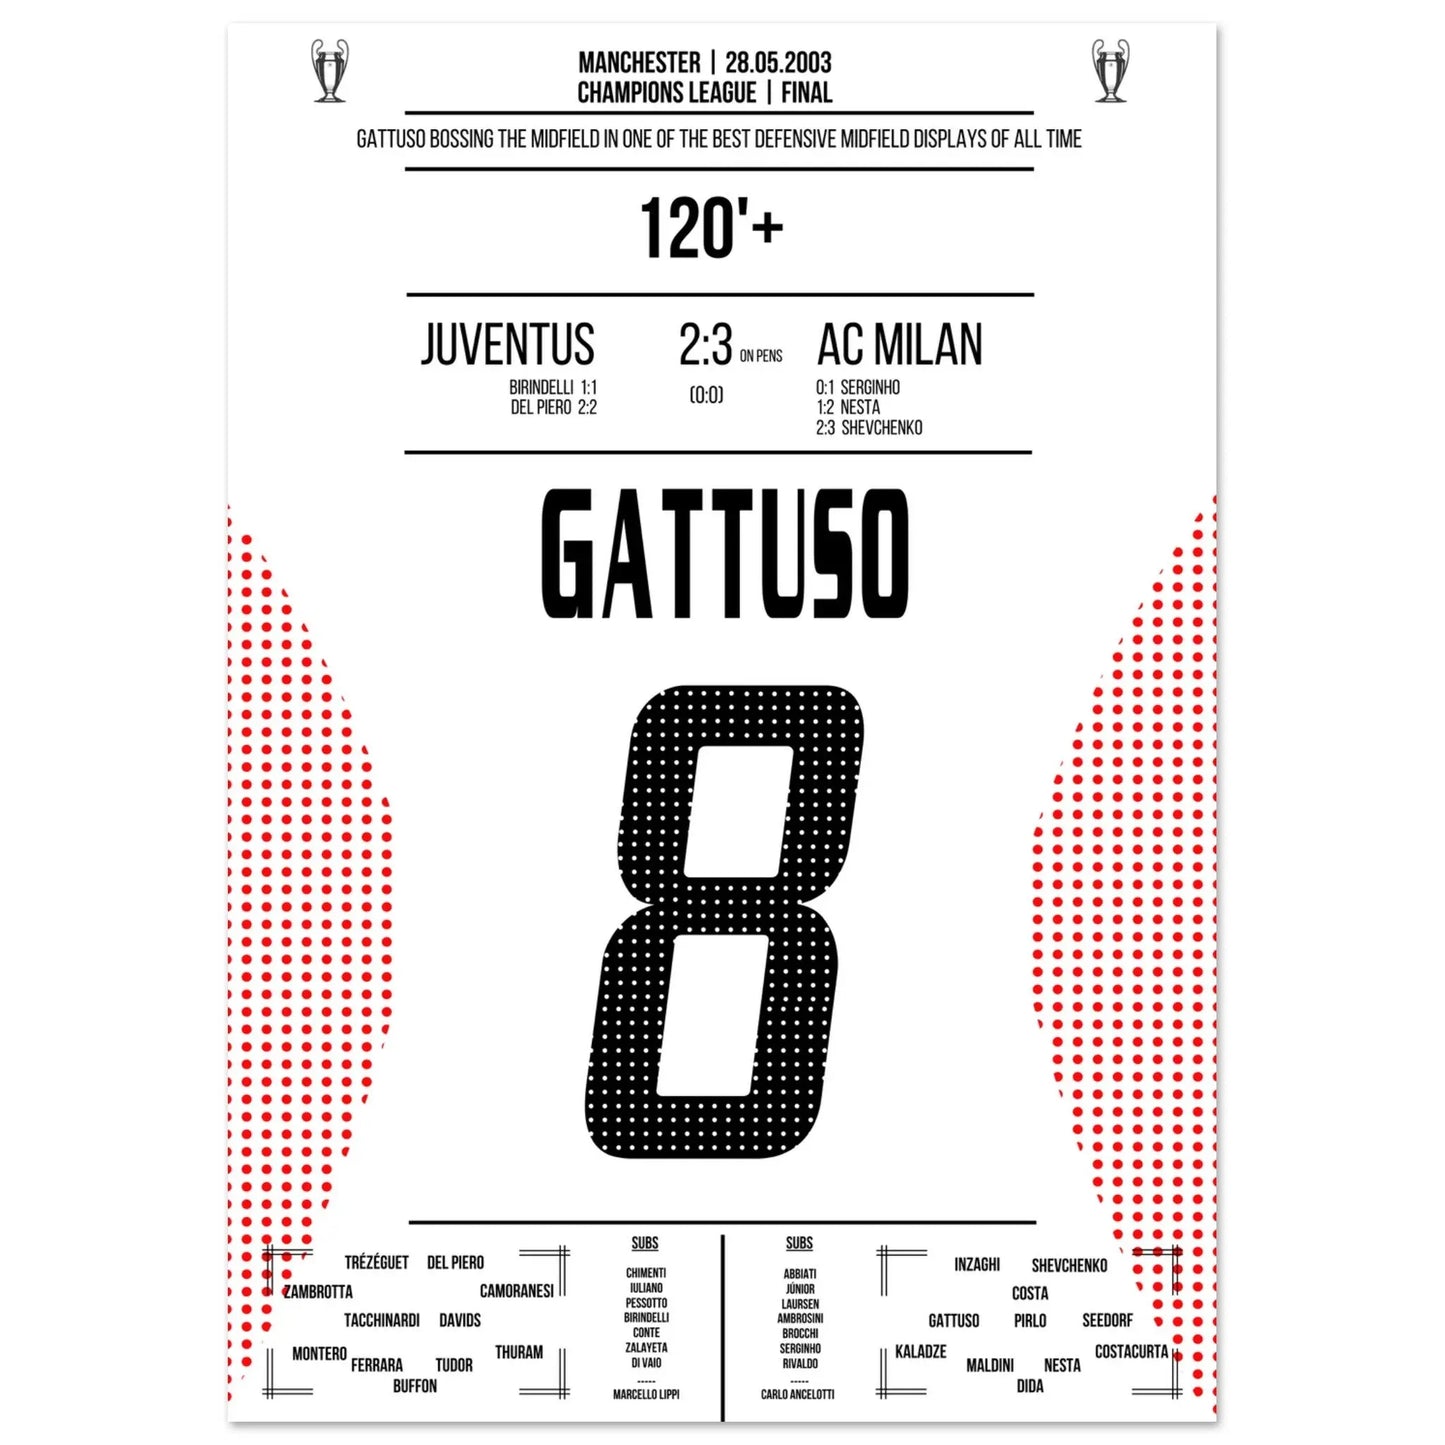 Defensive performance of the century by Gattuso in the CL final in 2003